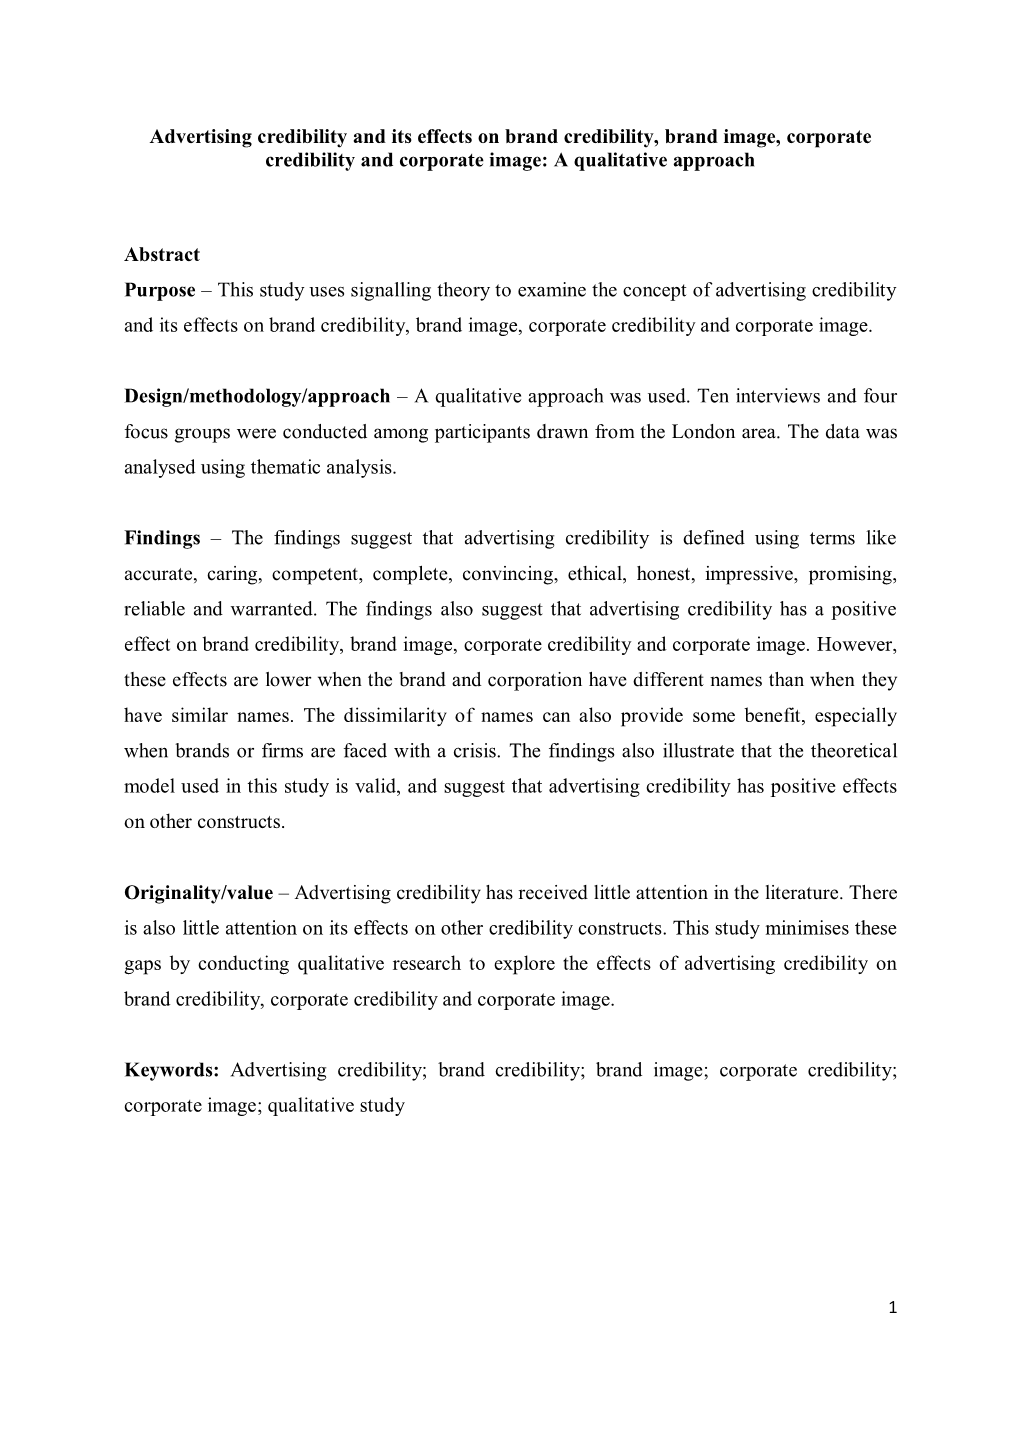 Advertising Credibility and Its Effects on Brand Credibility, Brand Image, Corporate Credibility and Corporate Image: a Qualitative Approach